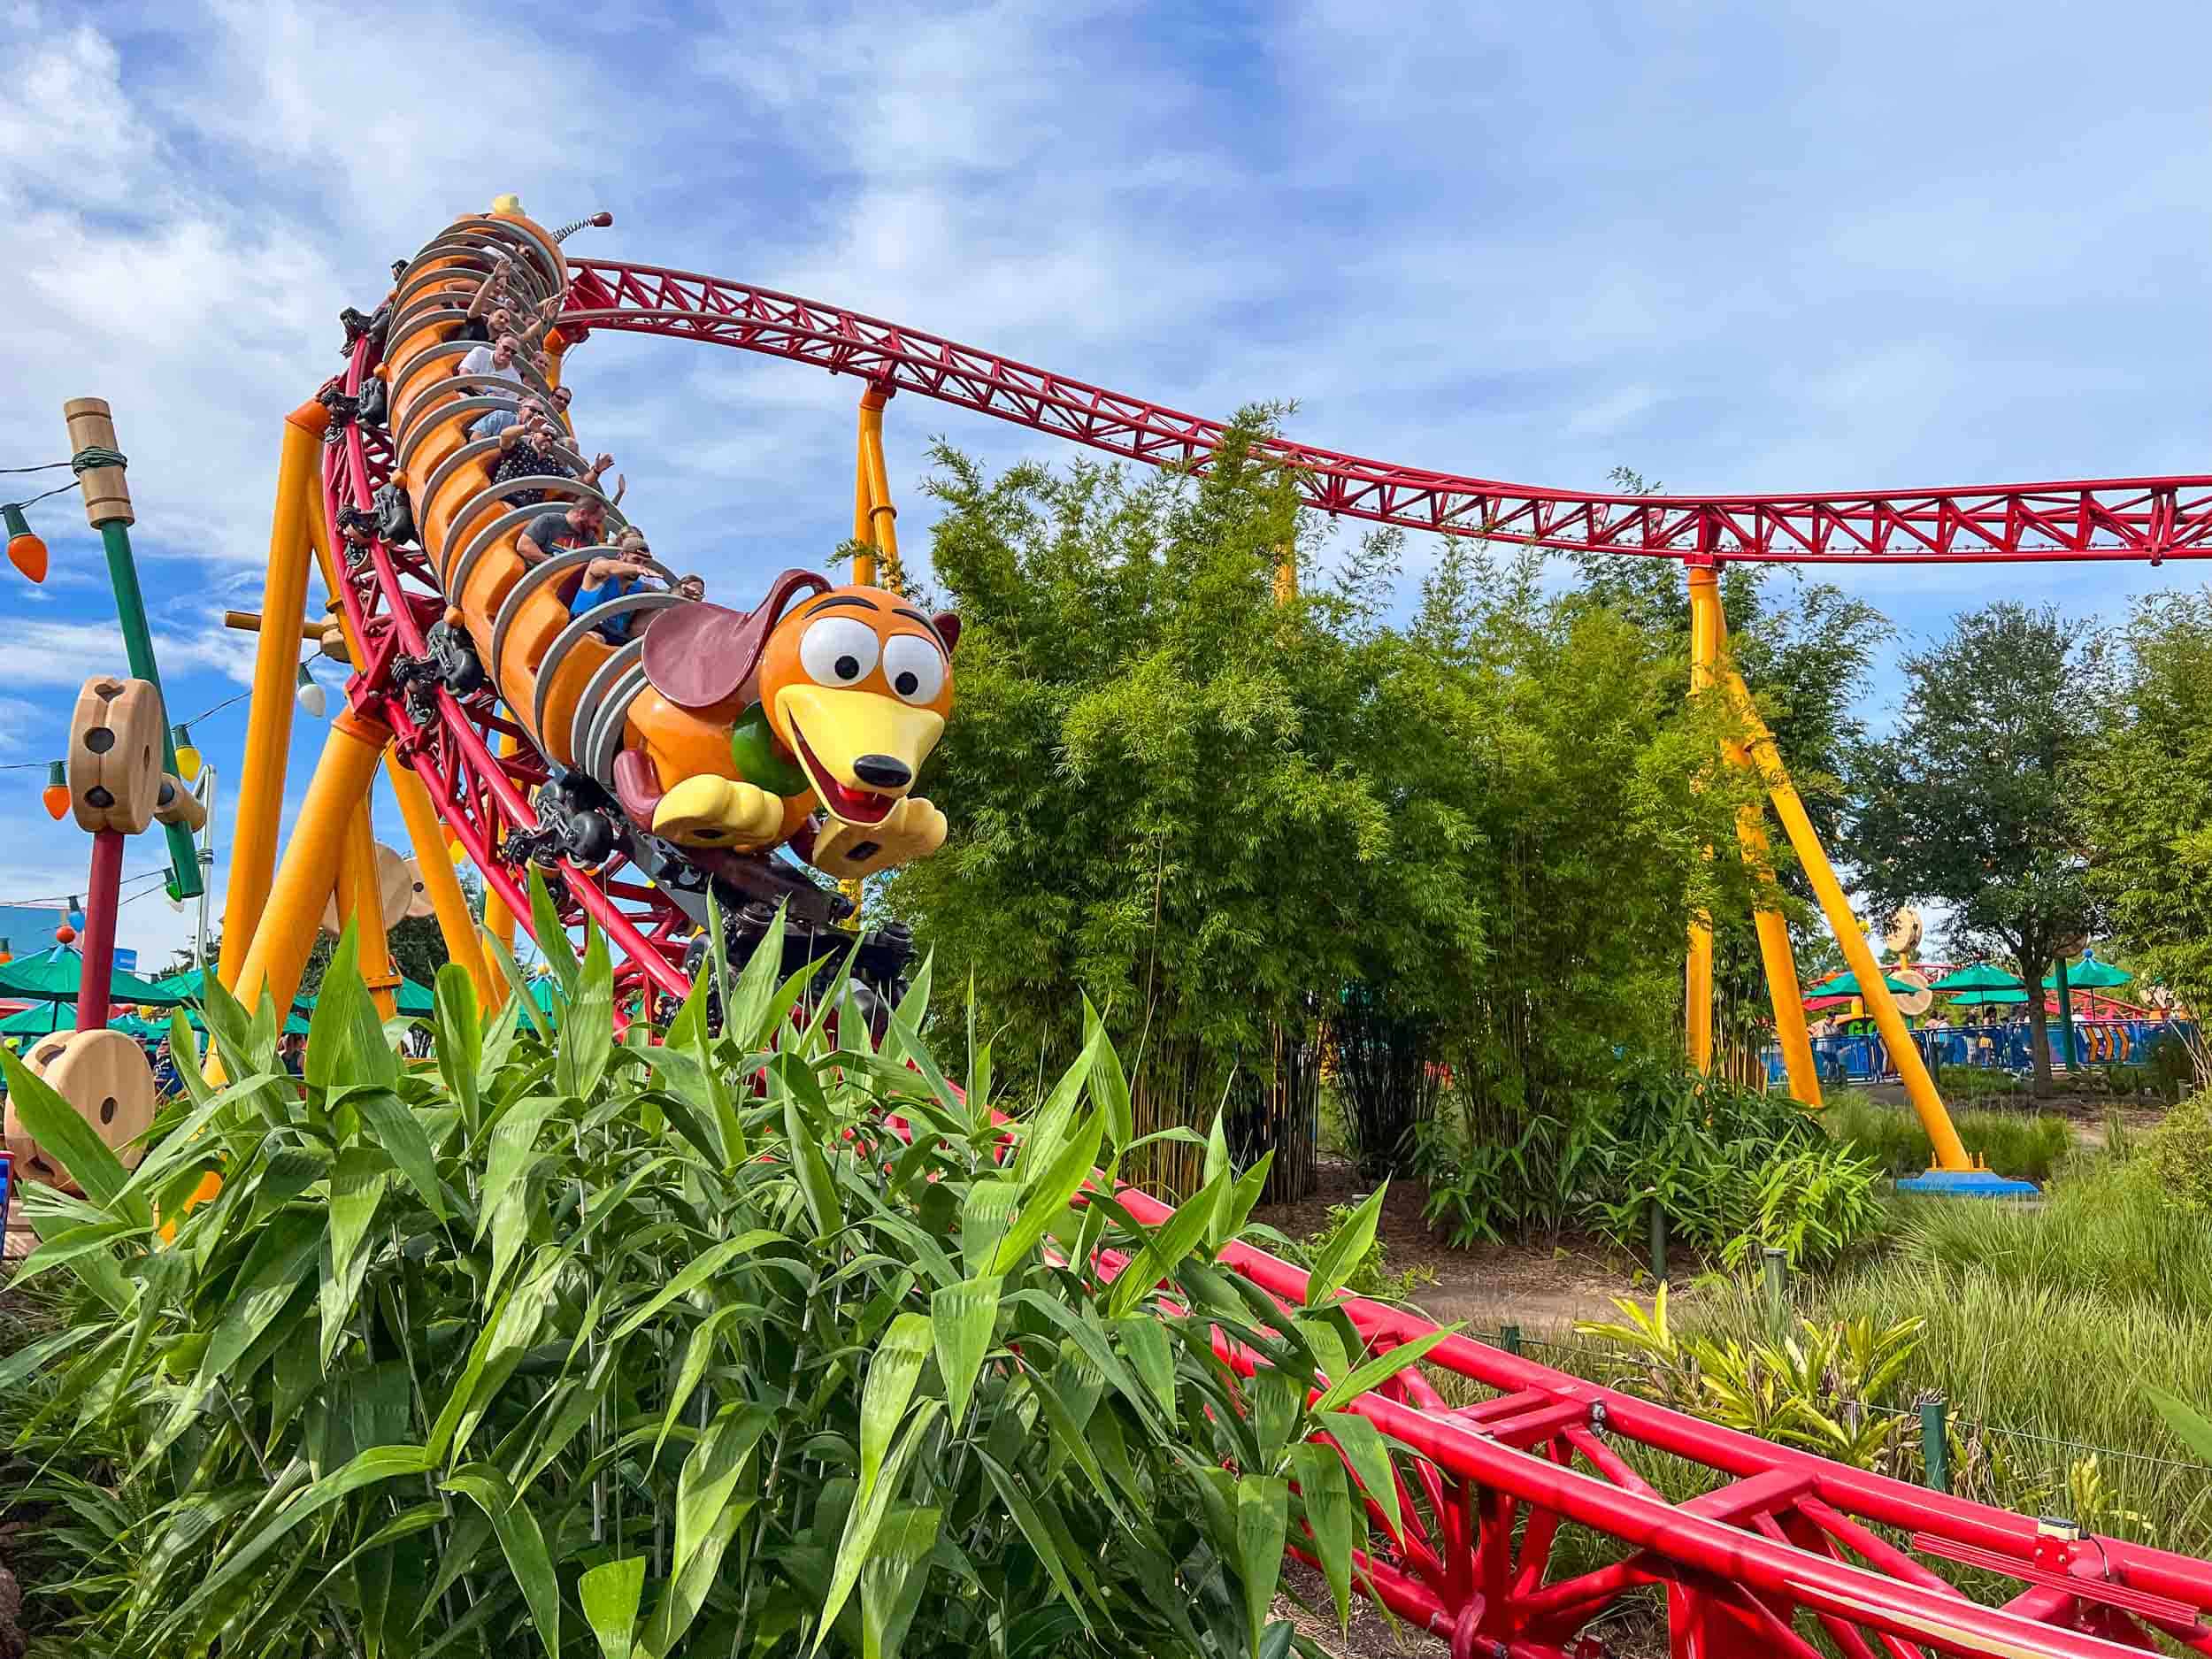 Slinky Dog Dash rollercoaster at Hollywood Studios is one of the best Disney Genie Plus rides